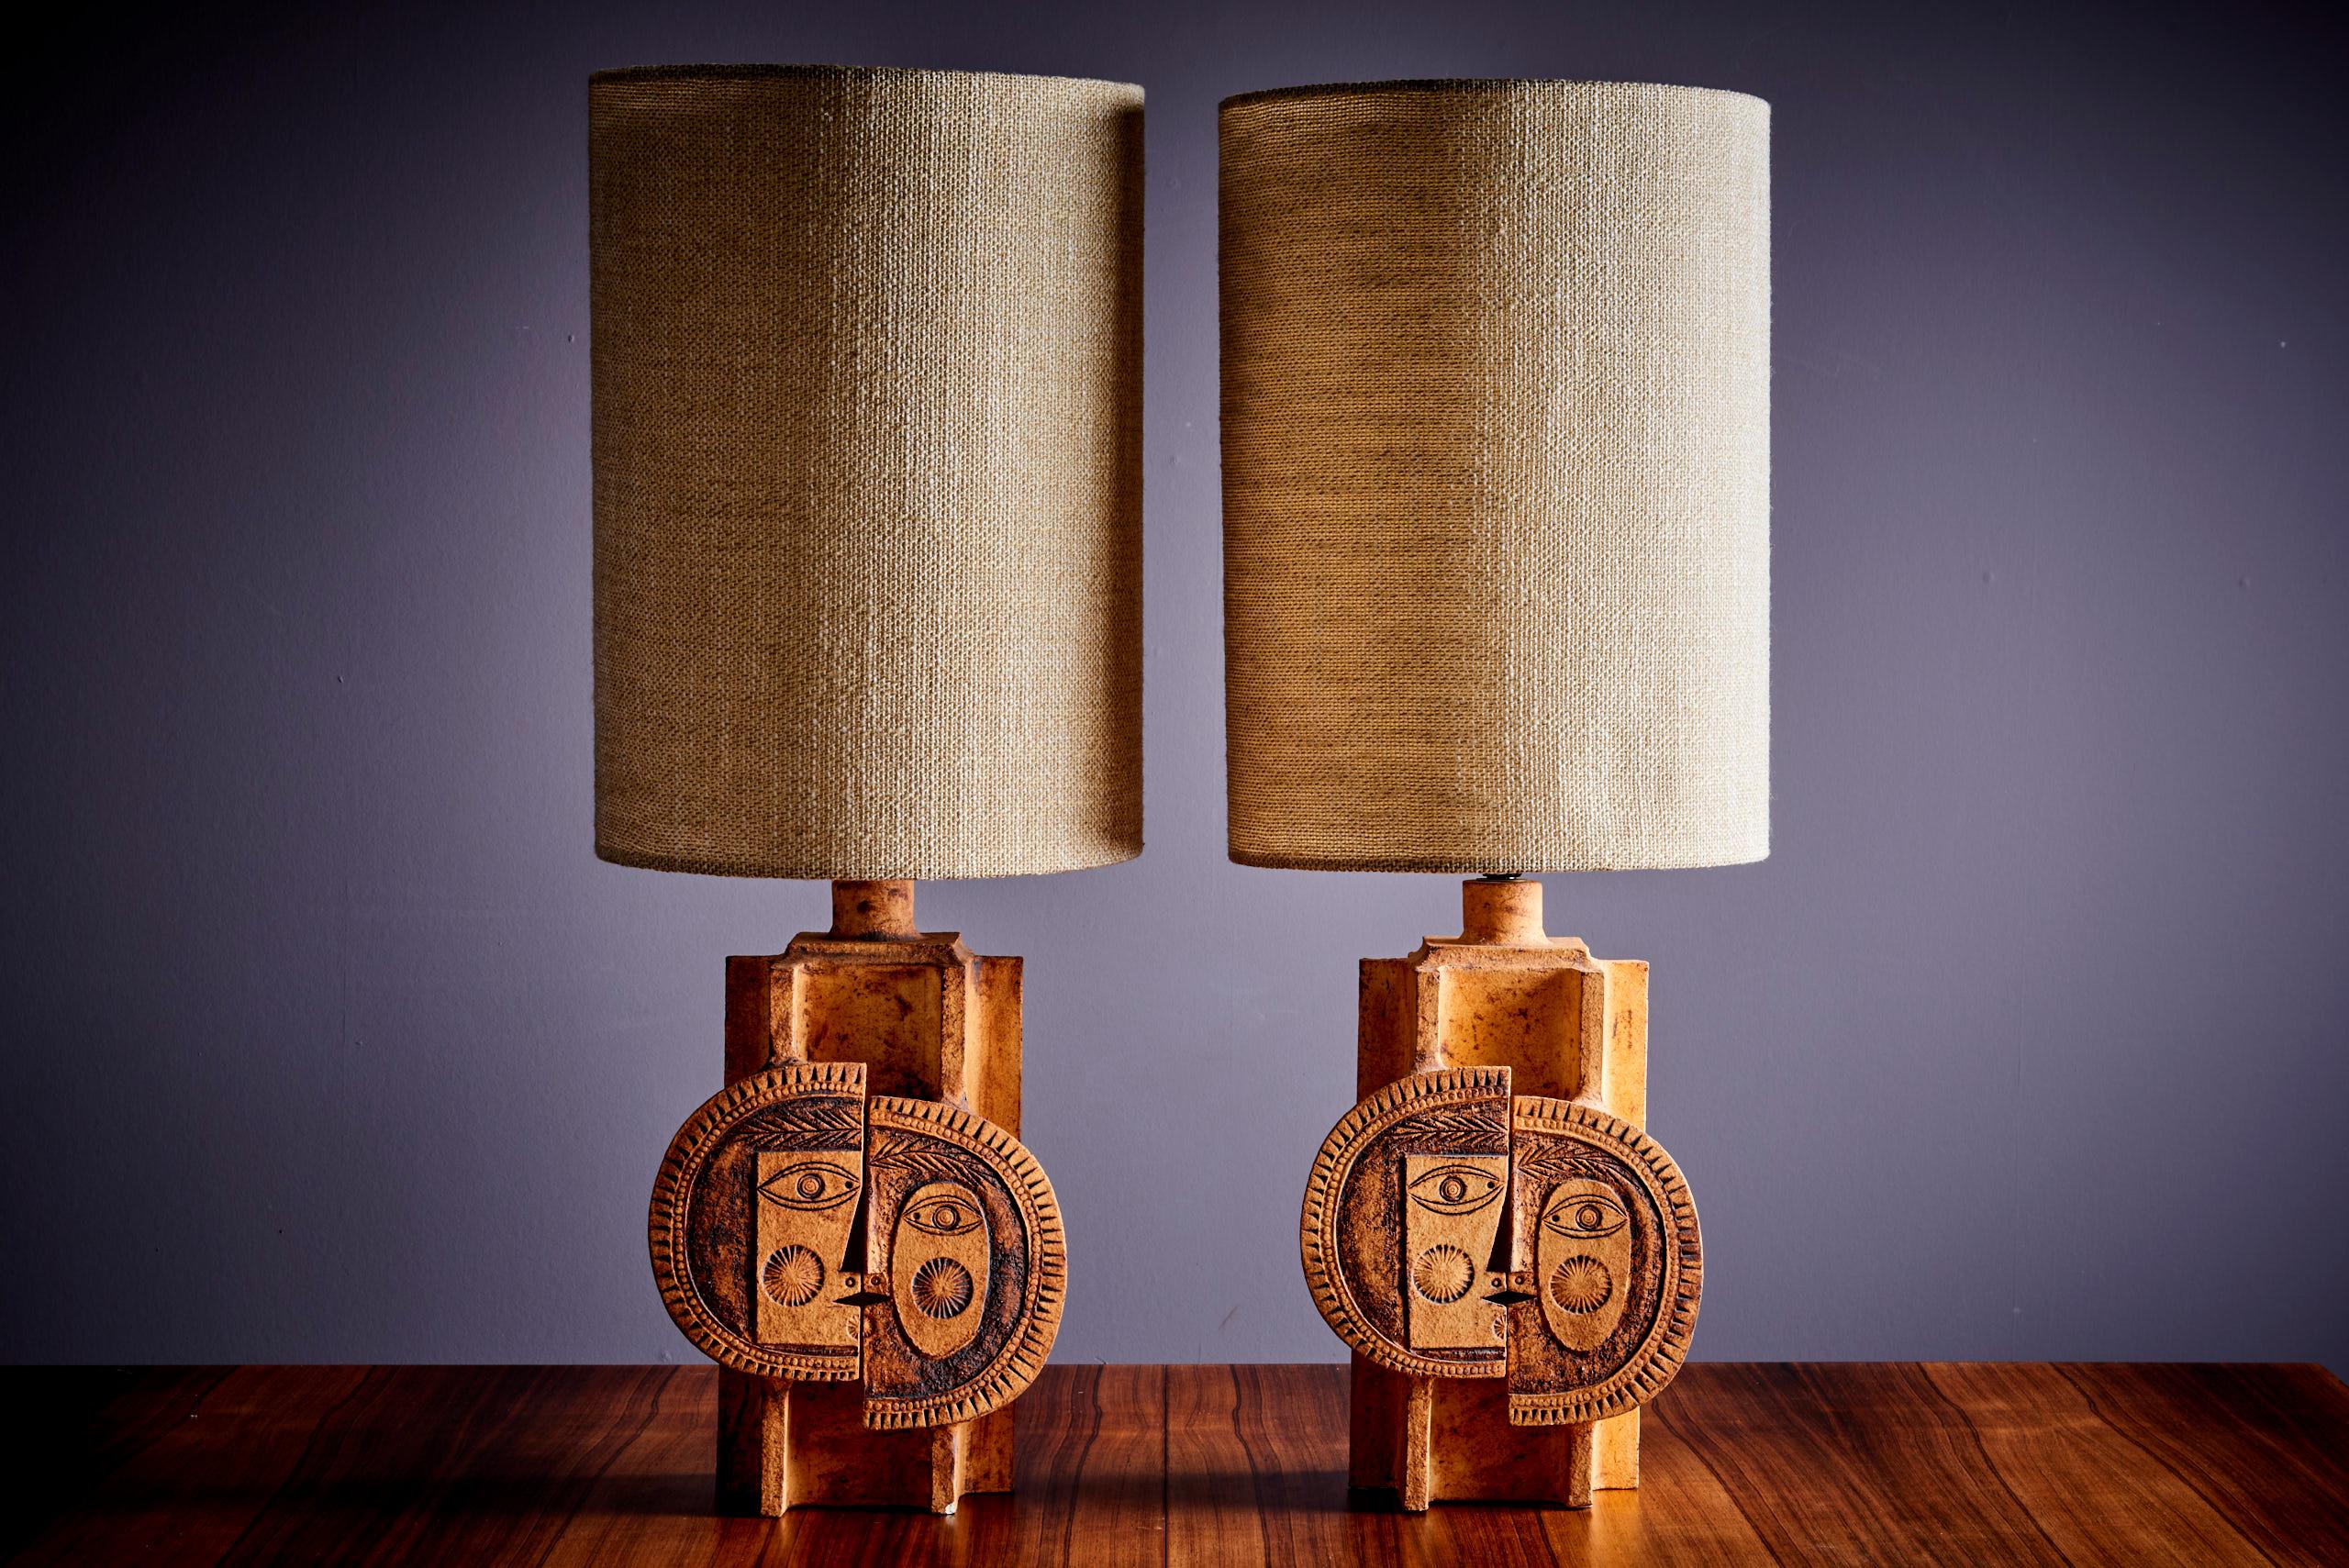 signed Roger Capron & Jean Derval Pair of Iconic Ceramic table lamps - 1970s For Sale 10